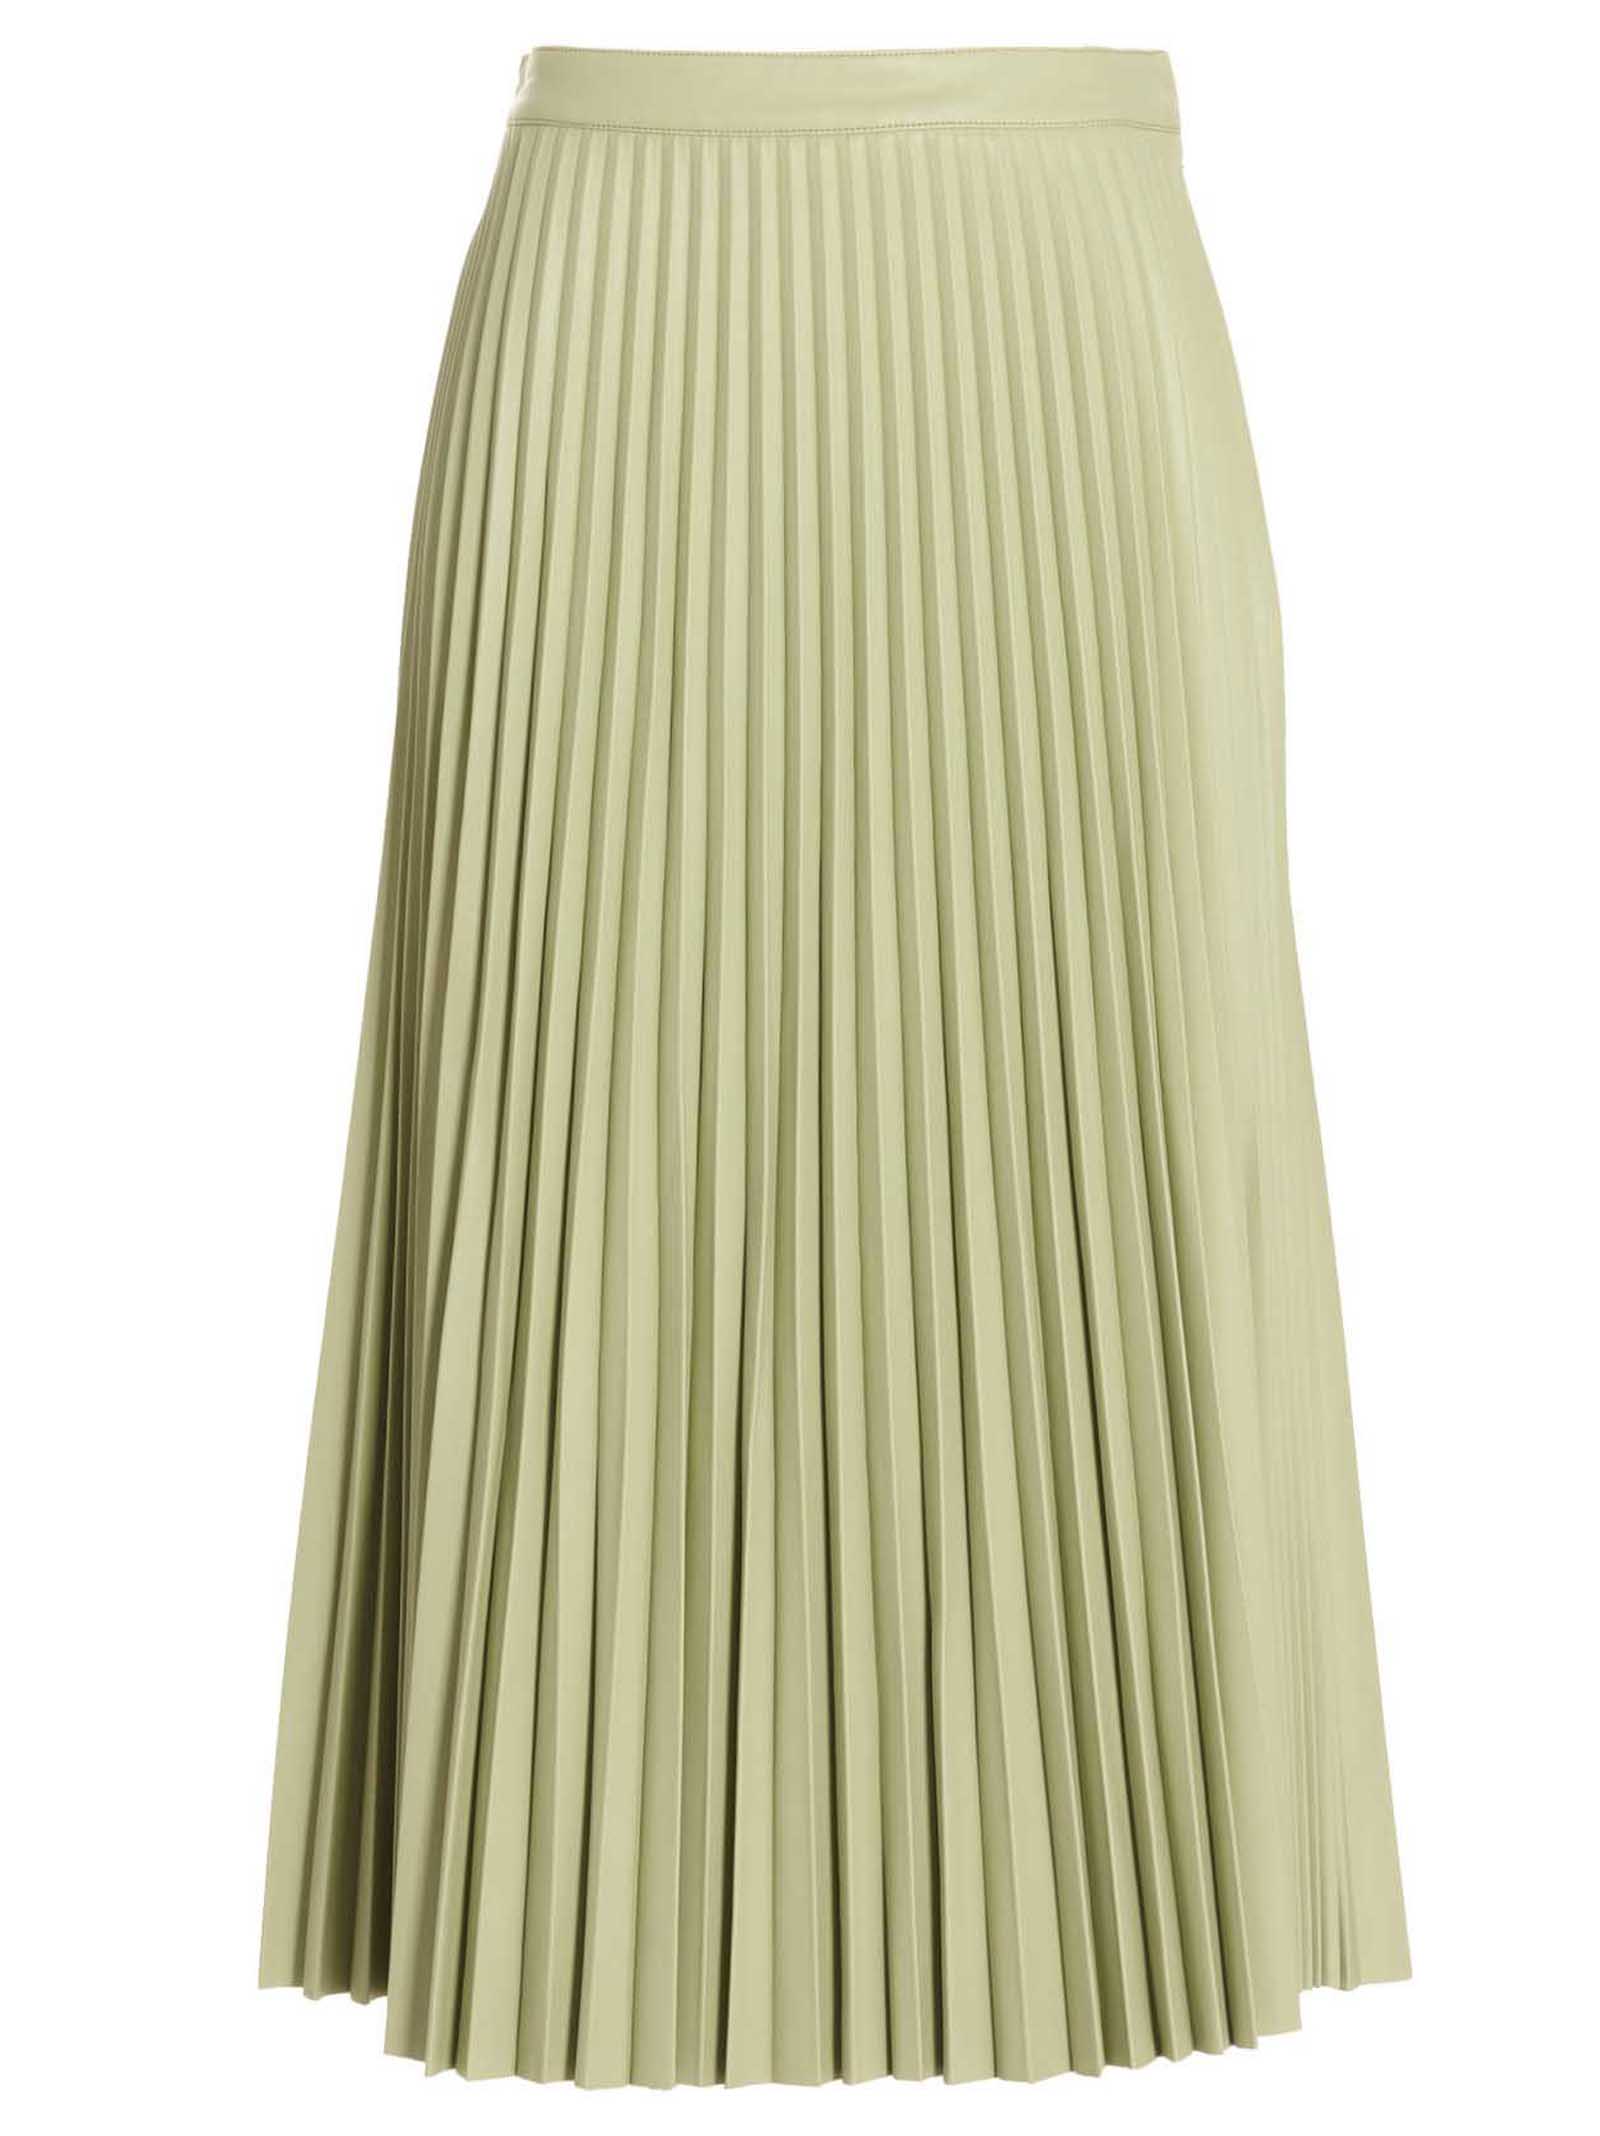 PROENZA SCHOULER WHITE LABEL PLEATED LEATHER FABRIC SKIRT